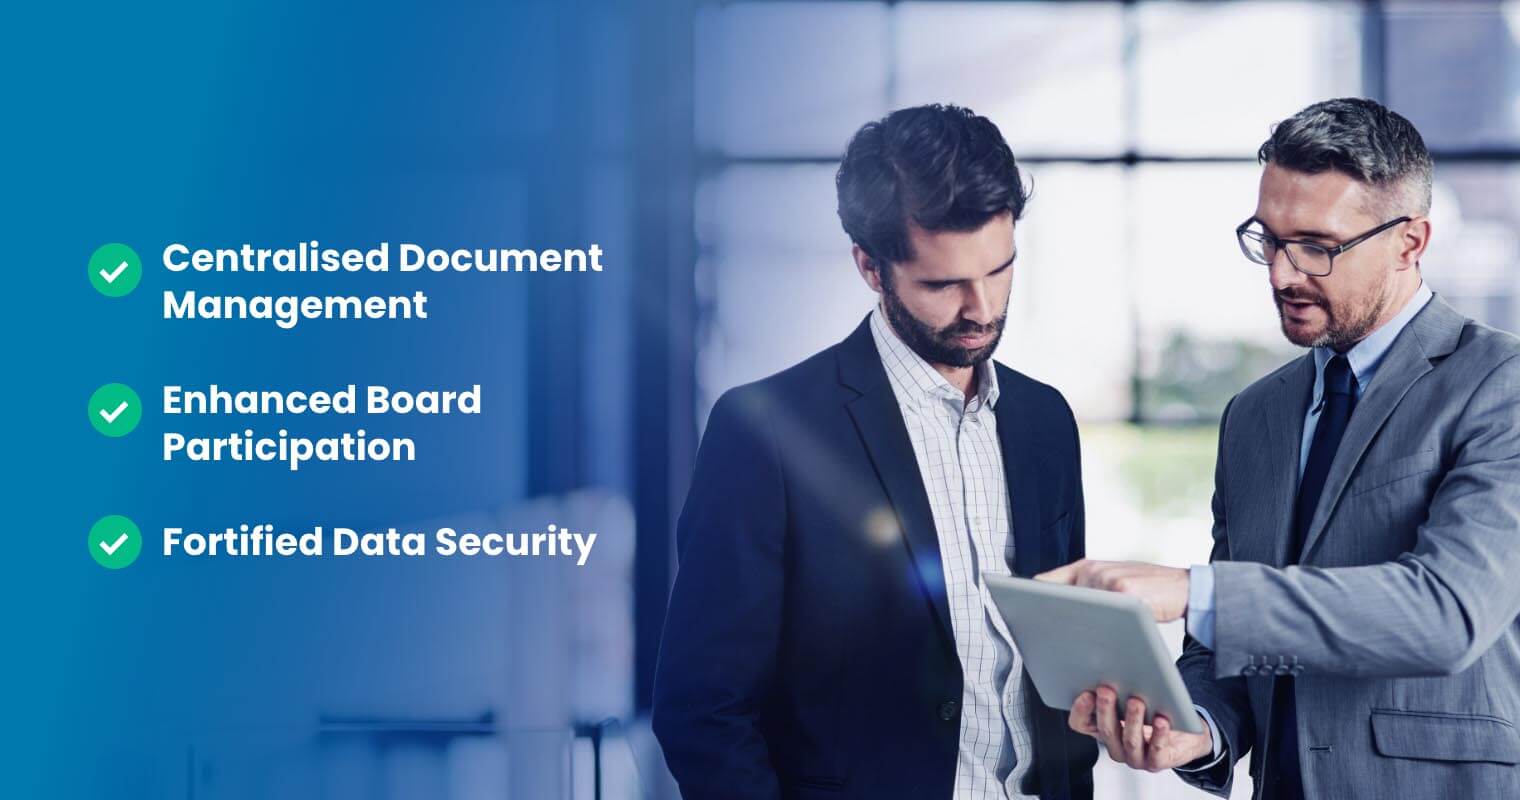 How can you enhance your ACNC compliance with board management software?